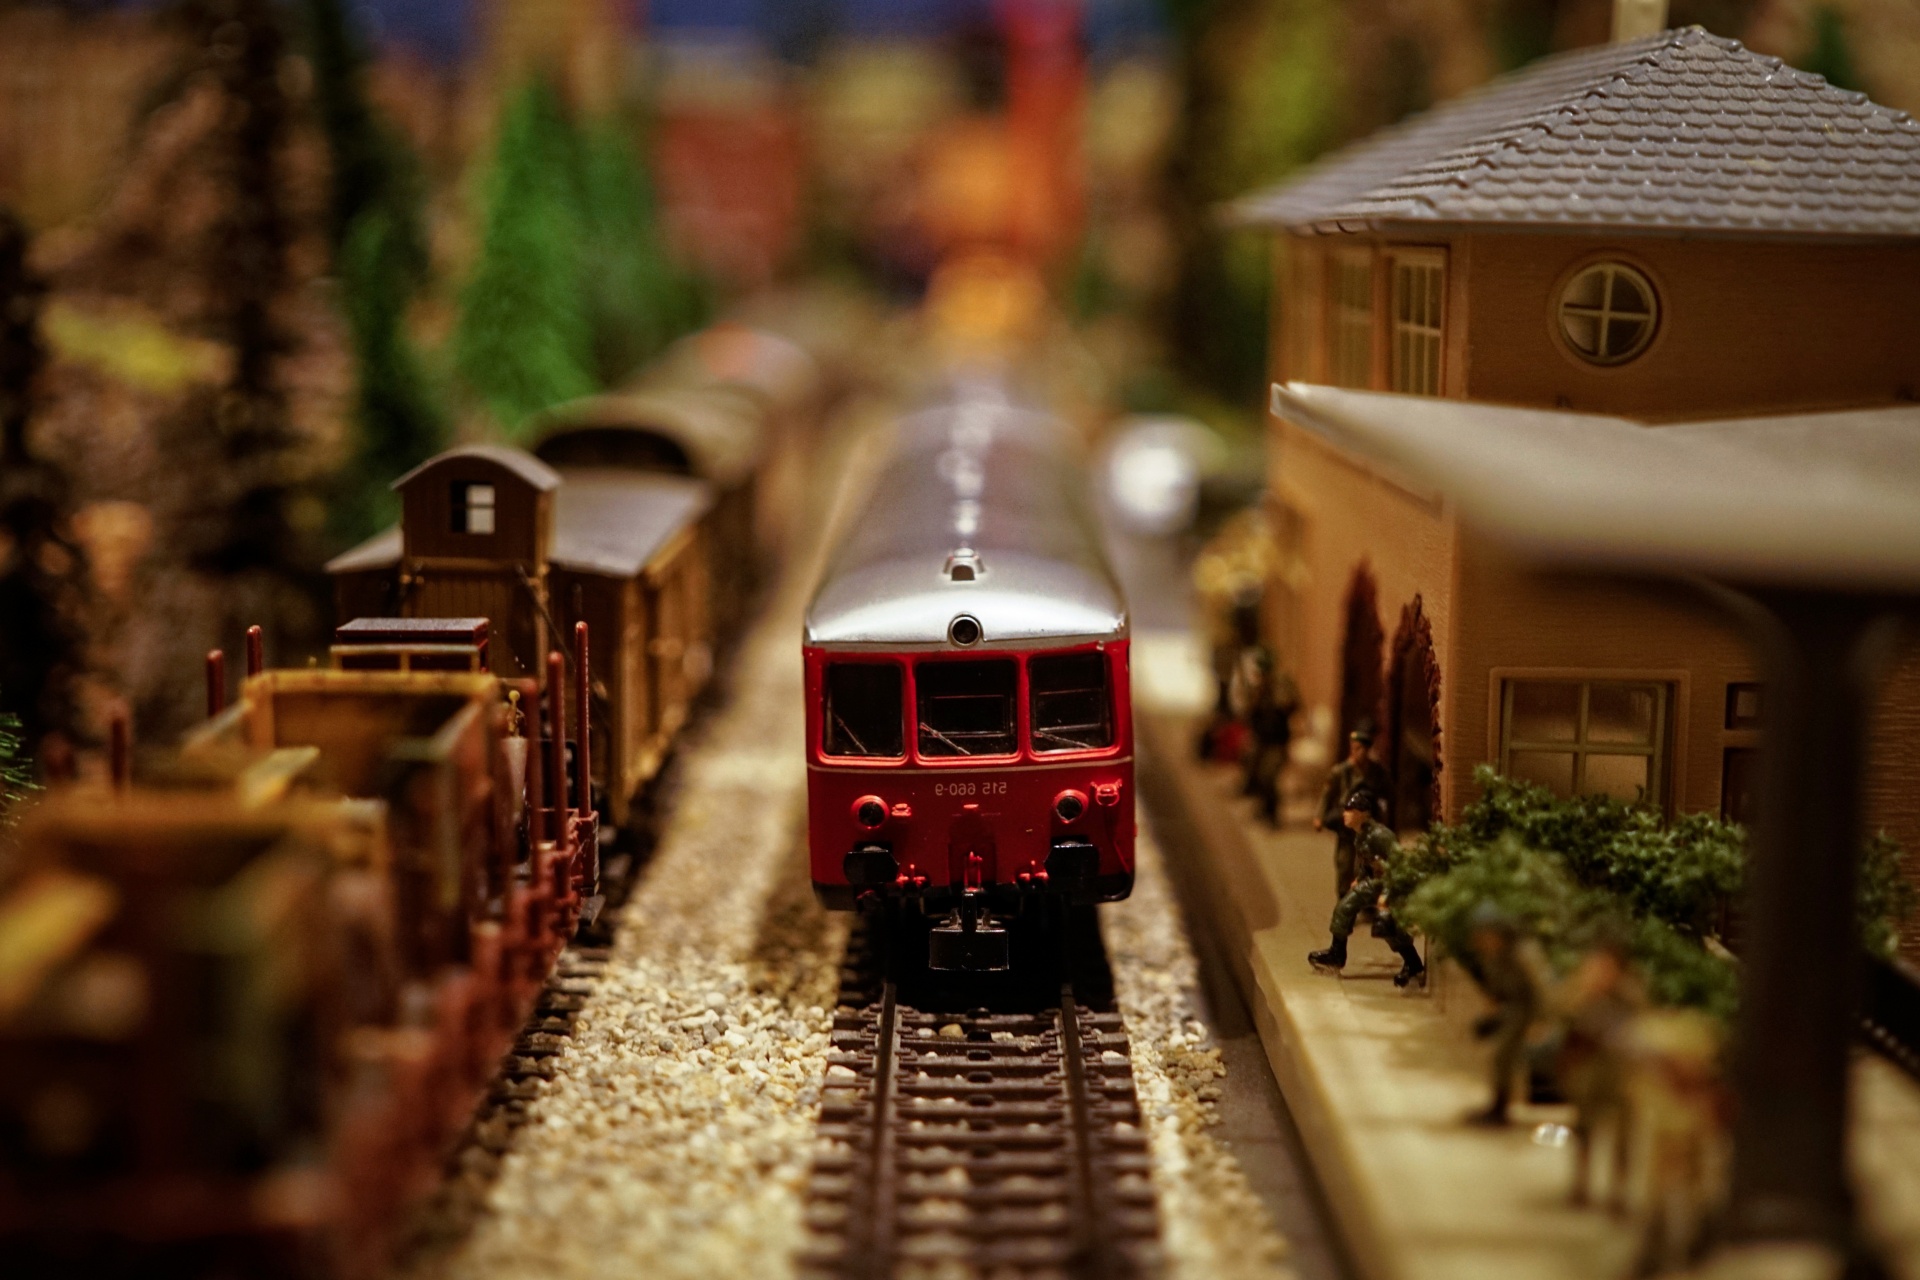 A red model train coming towards the camera